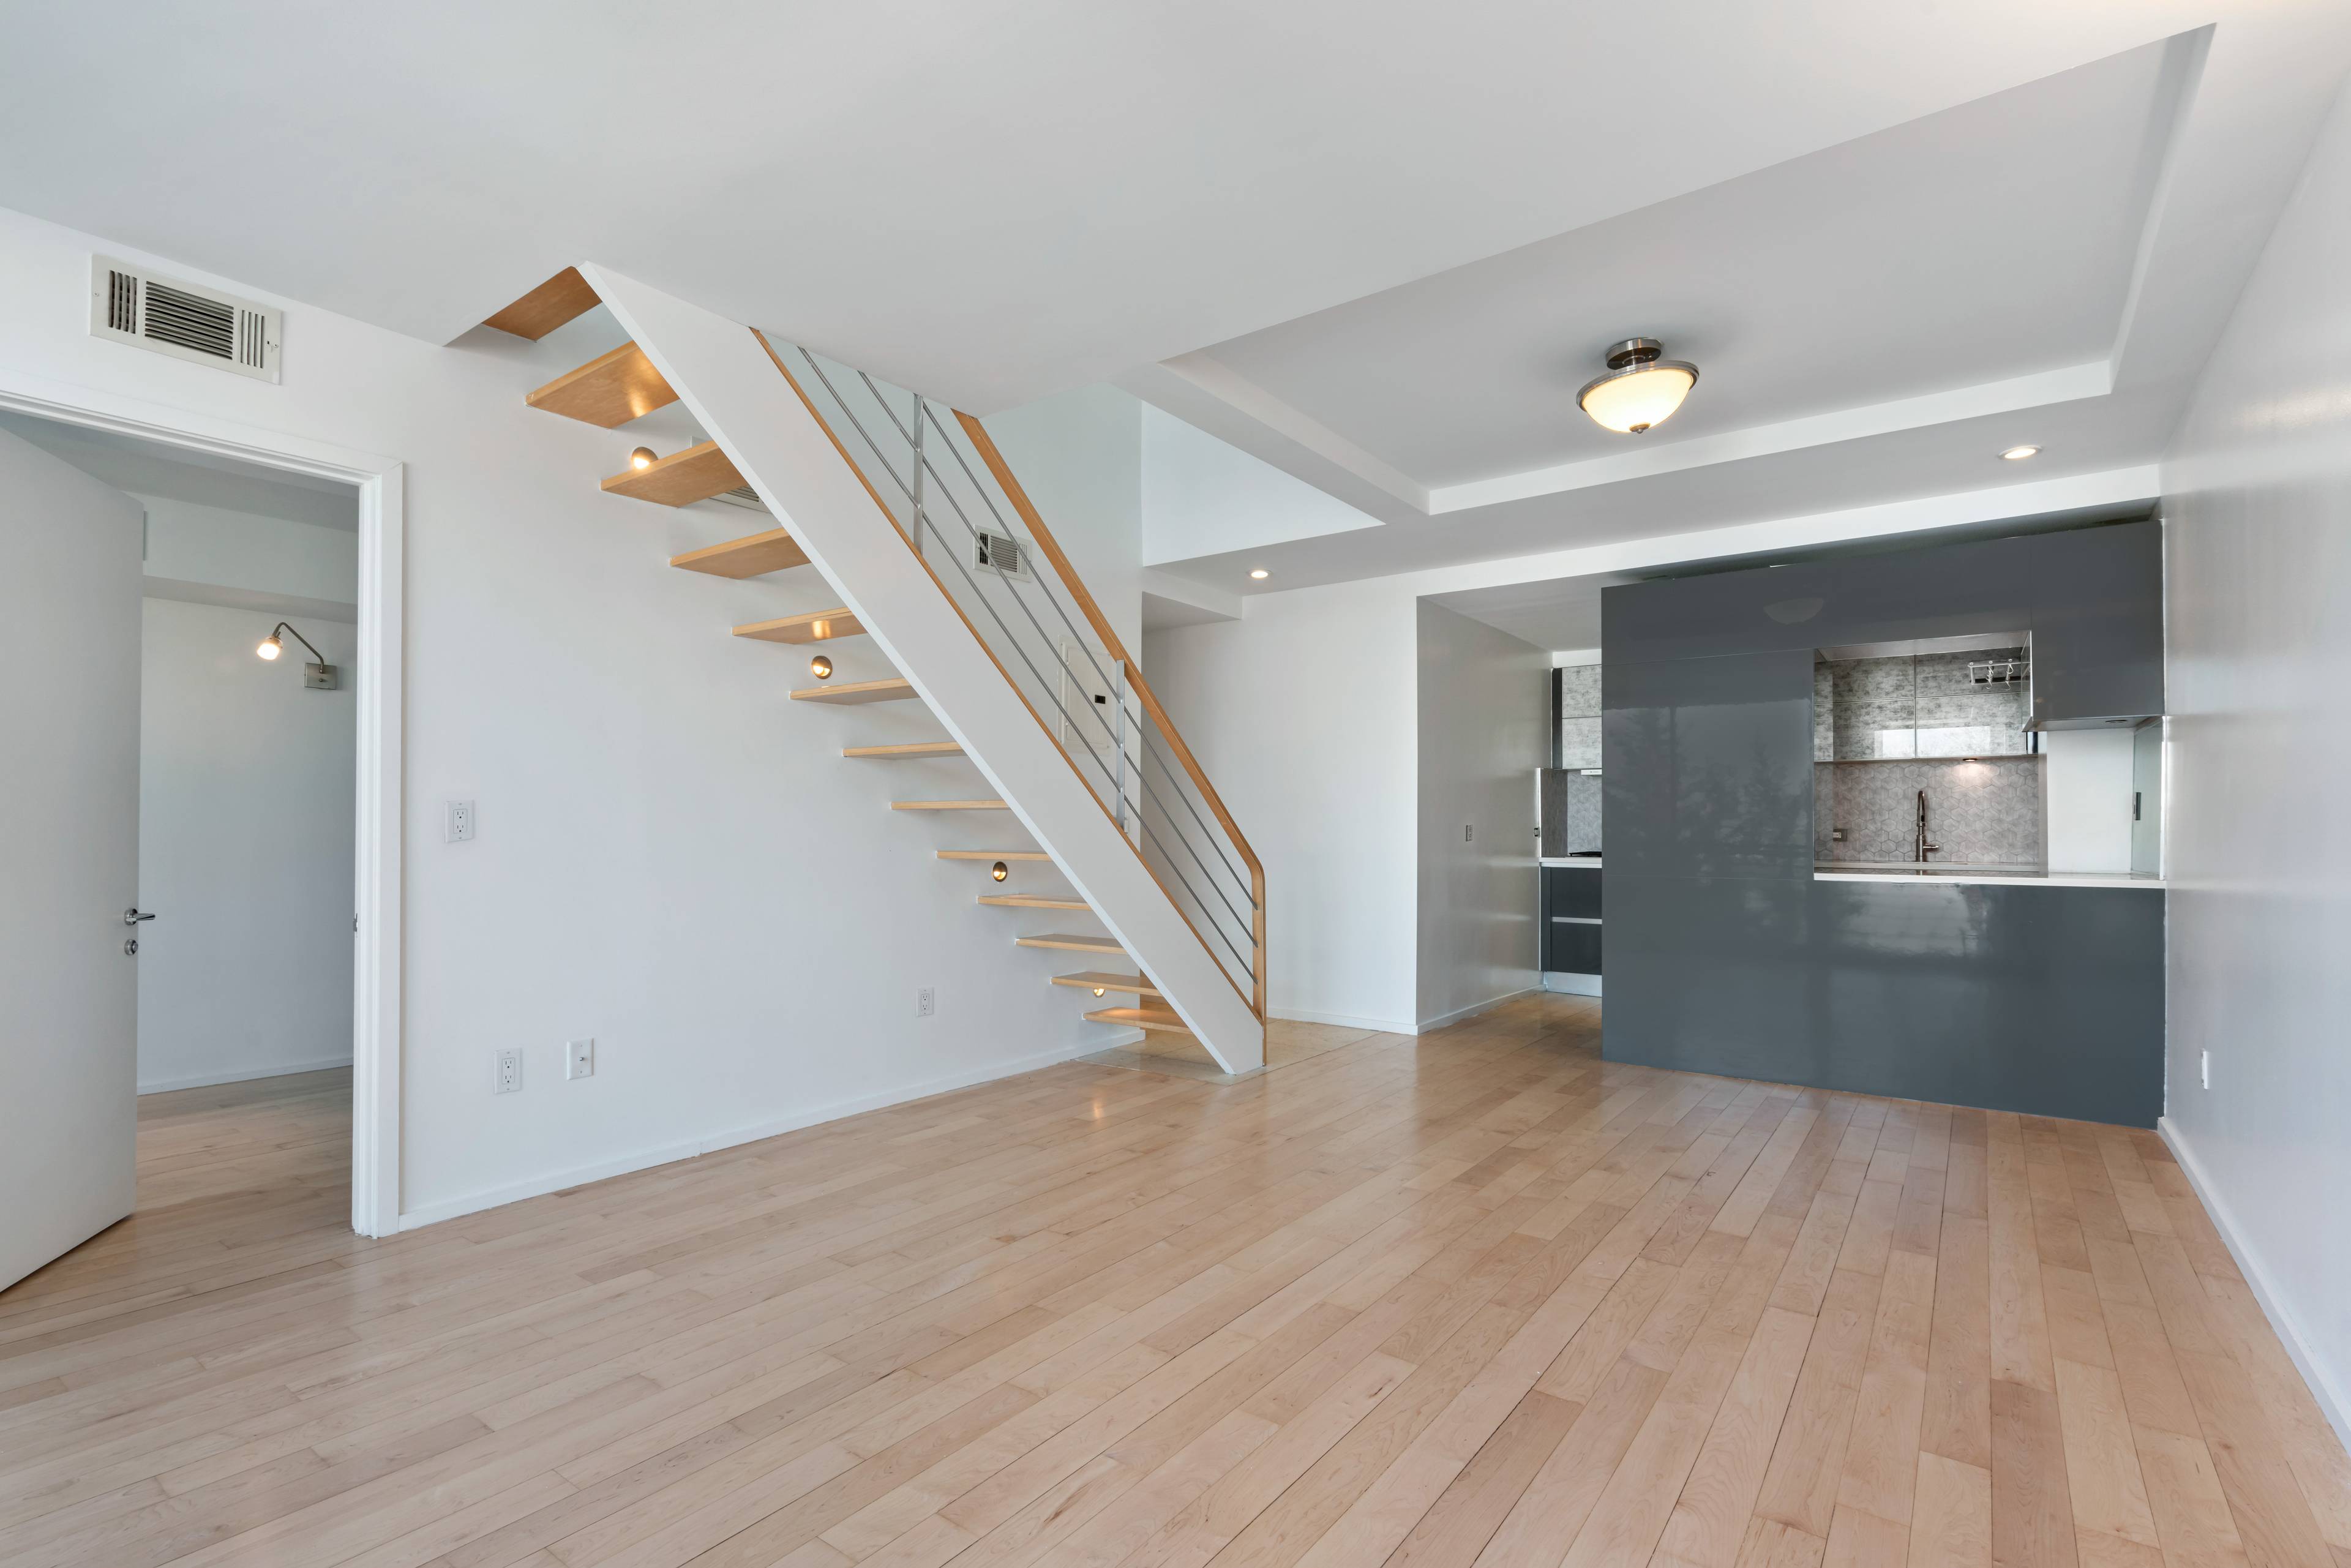 Unit 302 at 935 Pacific Street is a modern 2 bed 2 bath duplex with home office, balcony, deeded parking, storage, and 421a tax abatement expires 2034 !